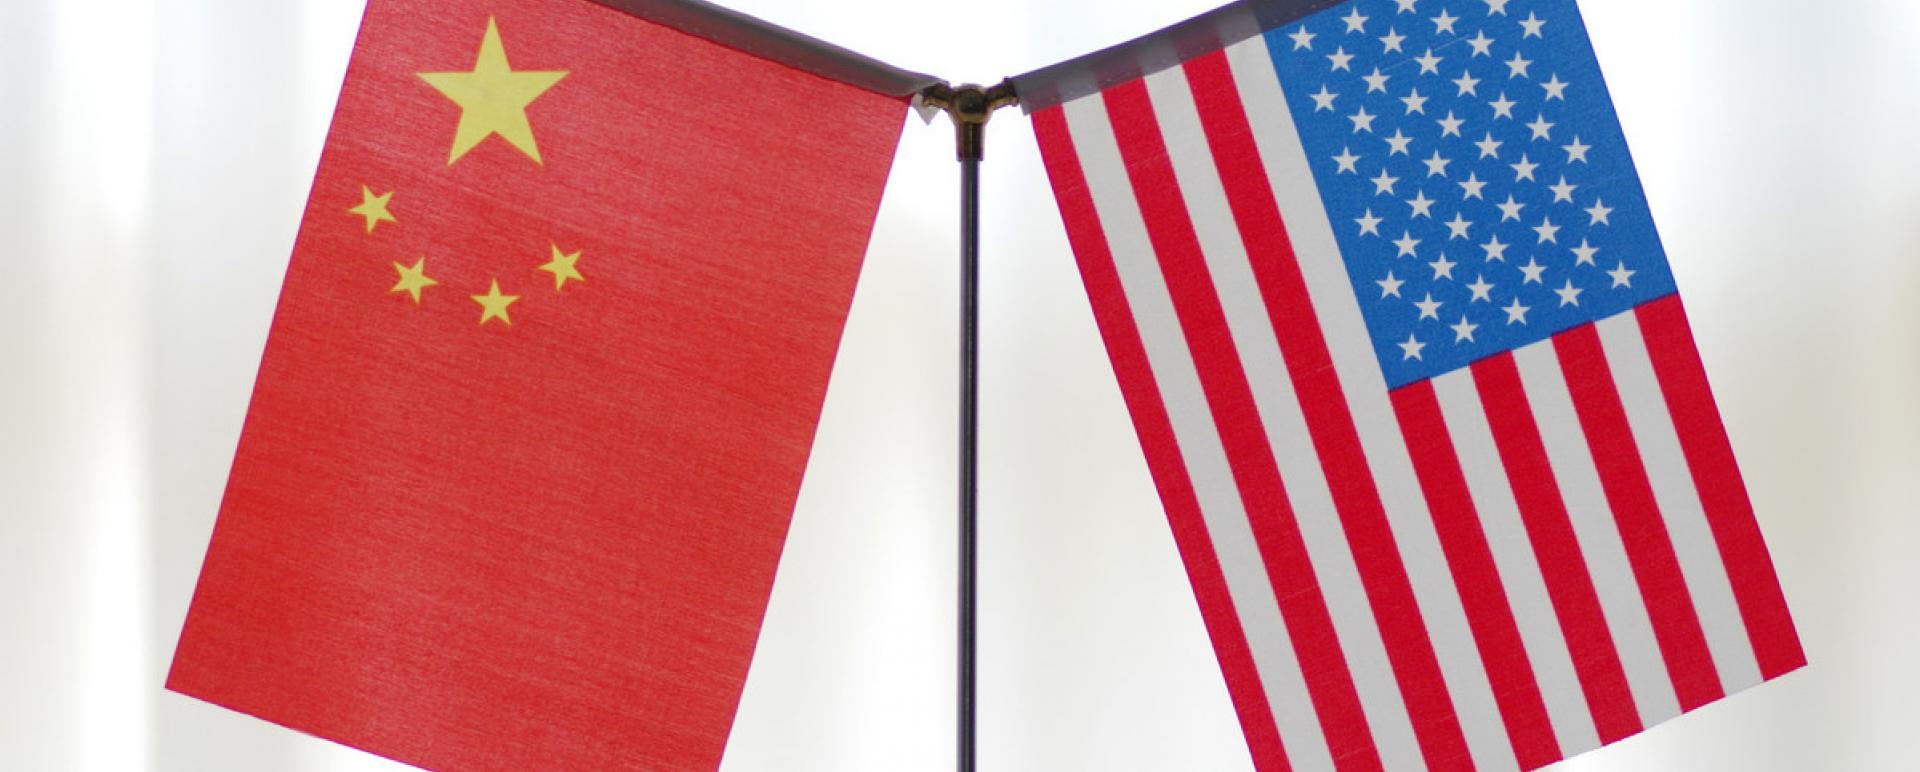  File photo: the national flags of China and the US. [Photo/IC] 